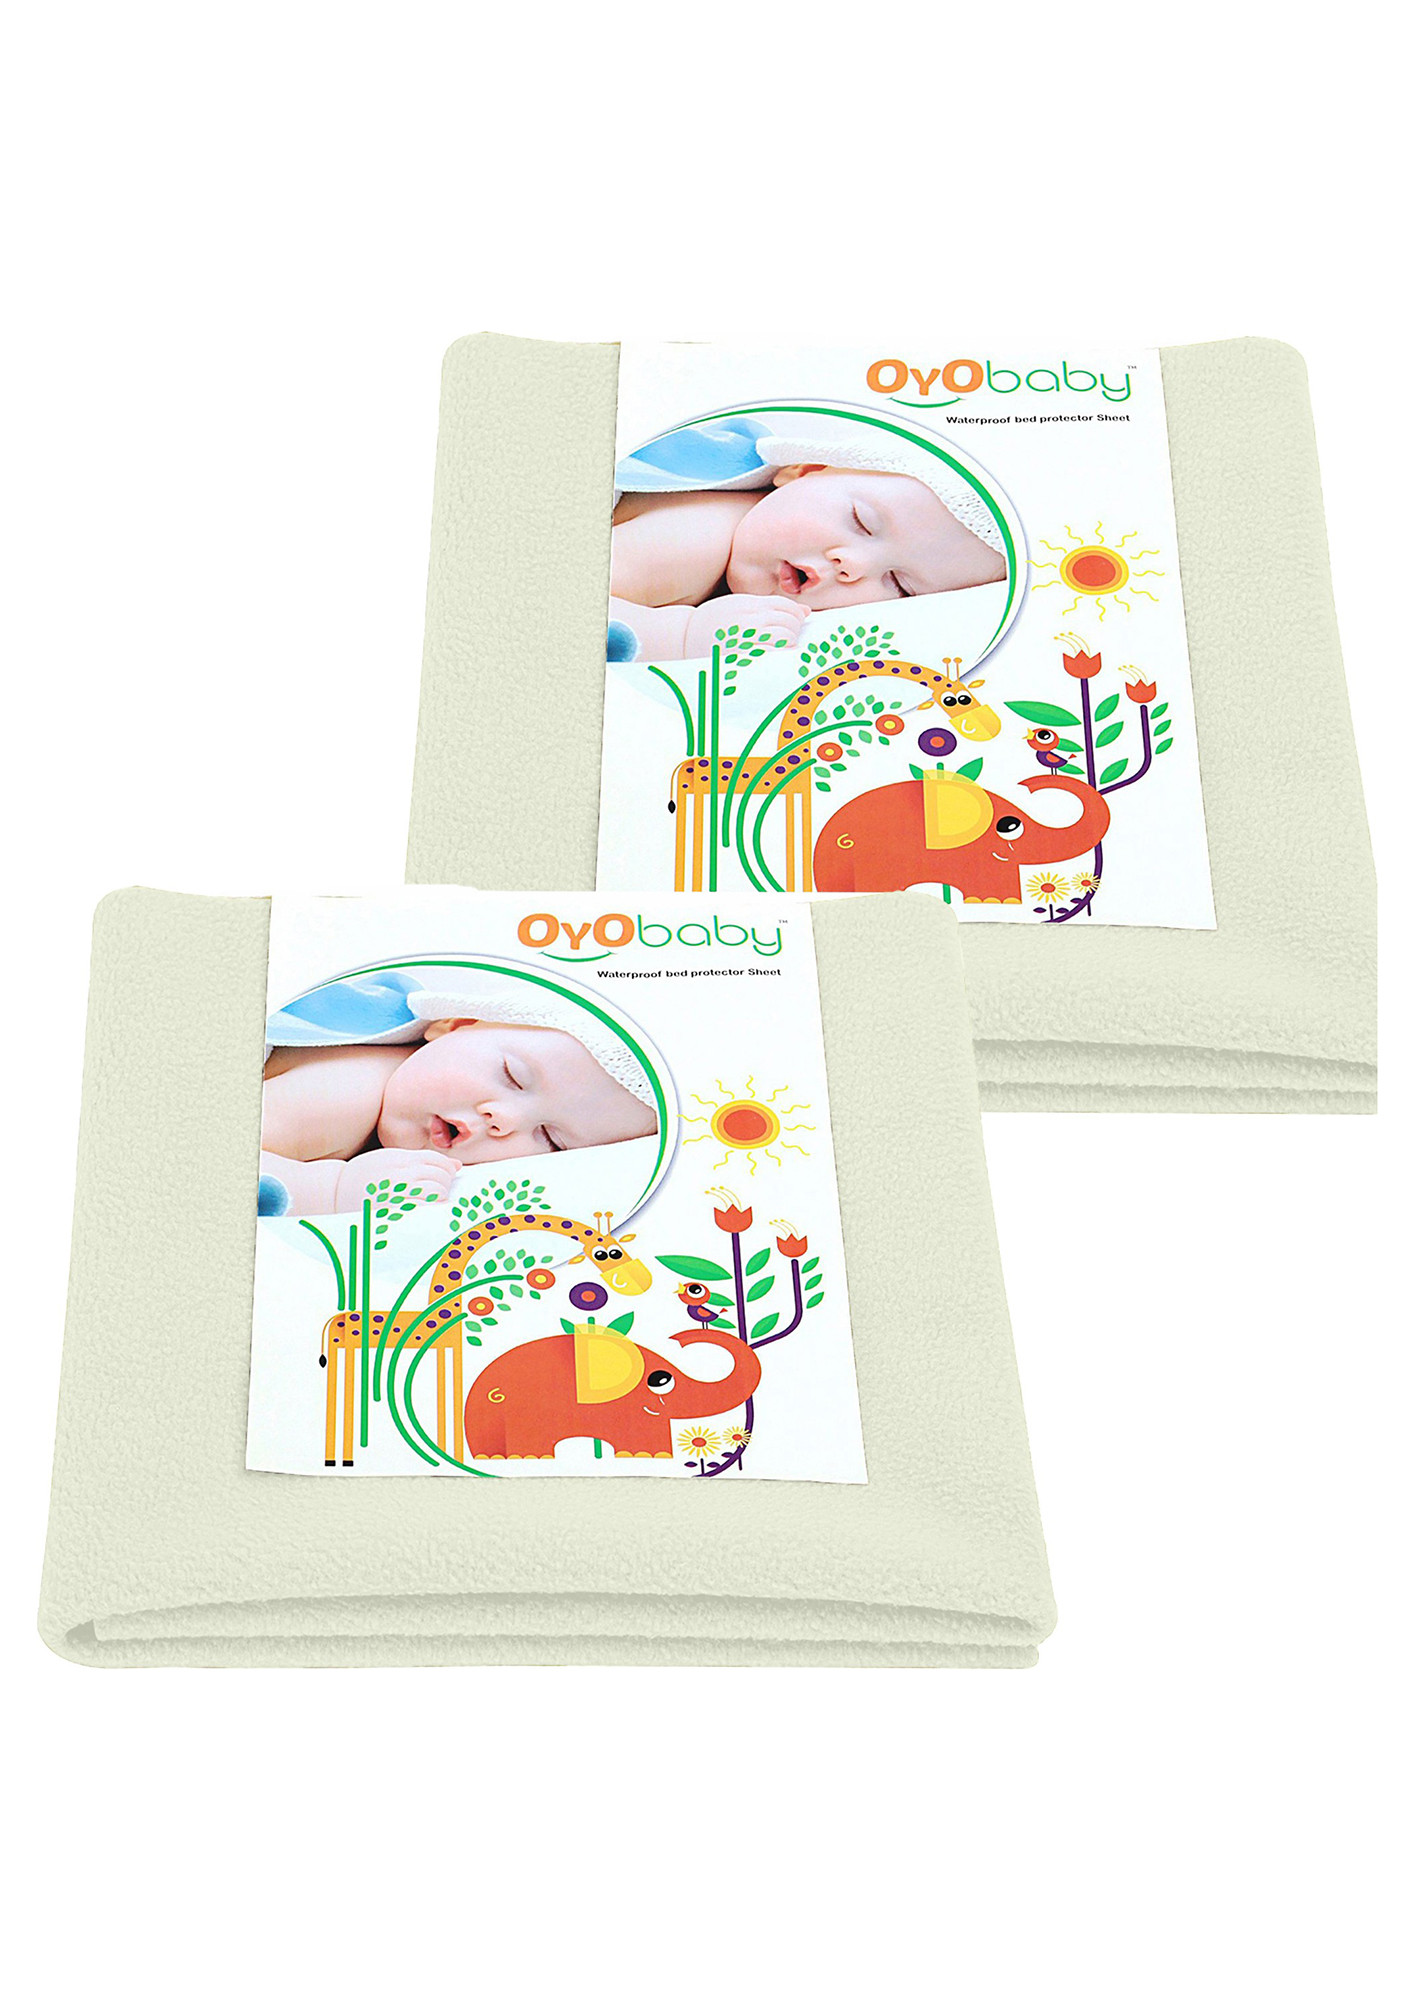 Oyo Baby Cotton Baby Bed Protecting Mat (Ivory, Large, Pack of 2)-OB-2027-IV